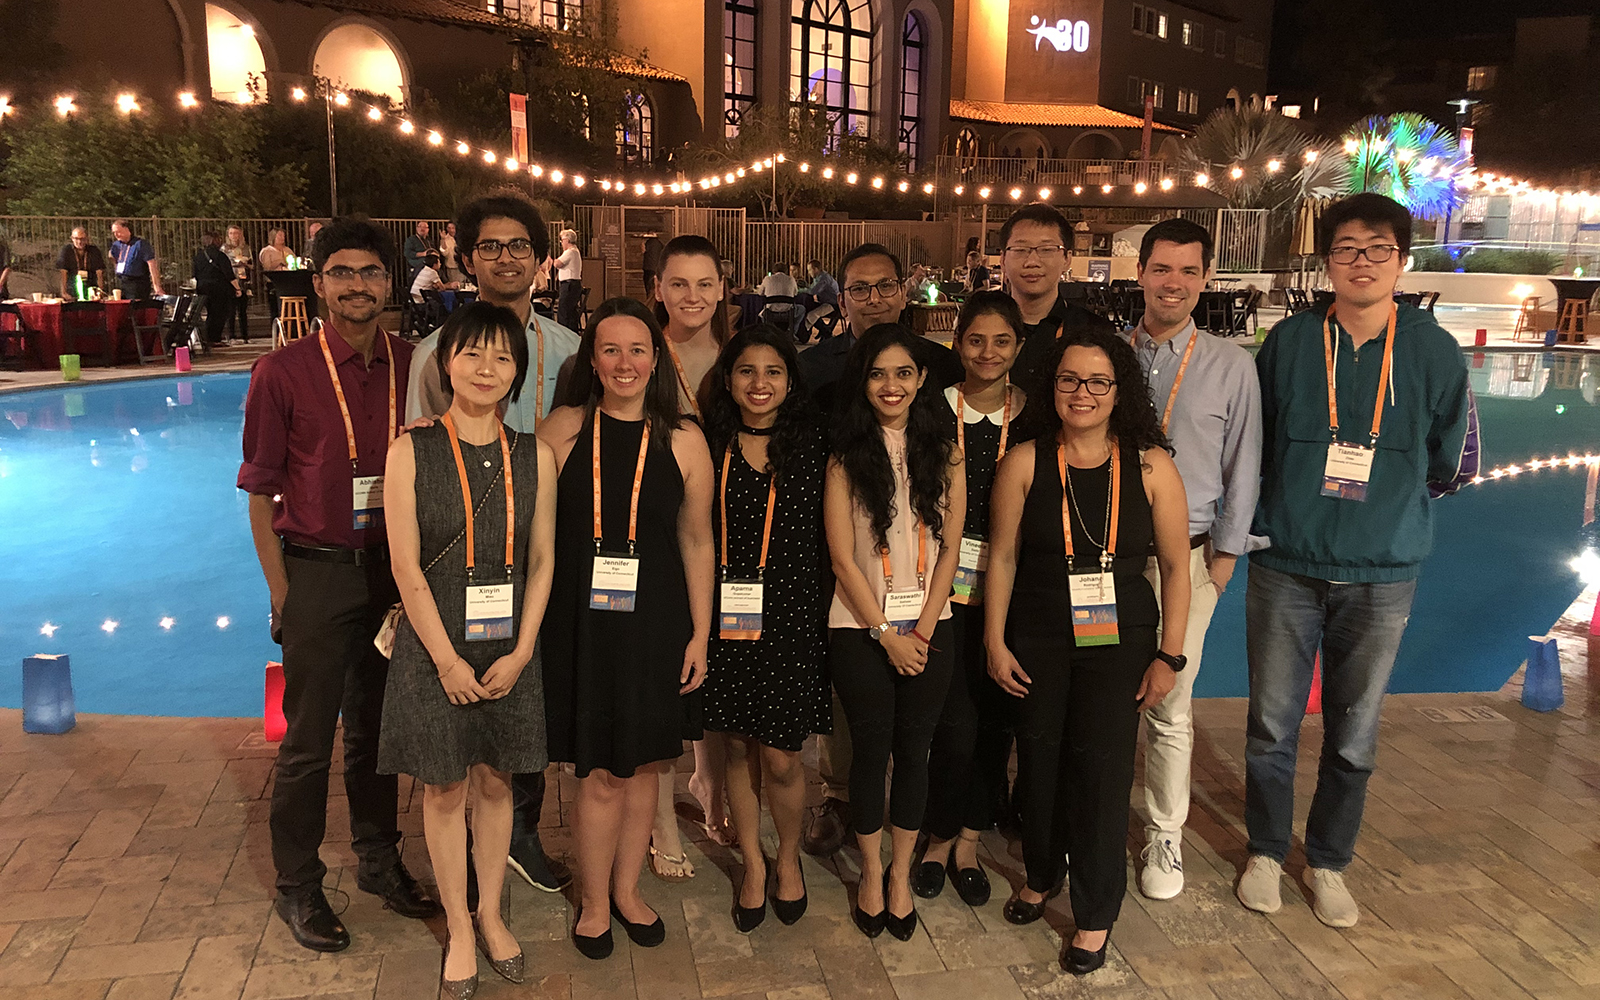 The UConn delegates pose at a reception during the JMP Discovery Summit in Tuscon, AZ.  The two UConn teams represented here tied for first place in the contest. (Contributed Photo)